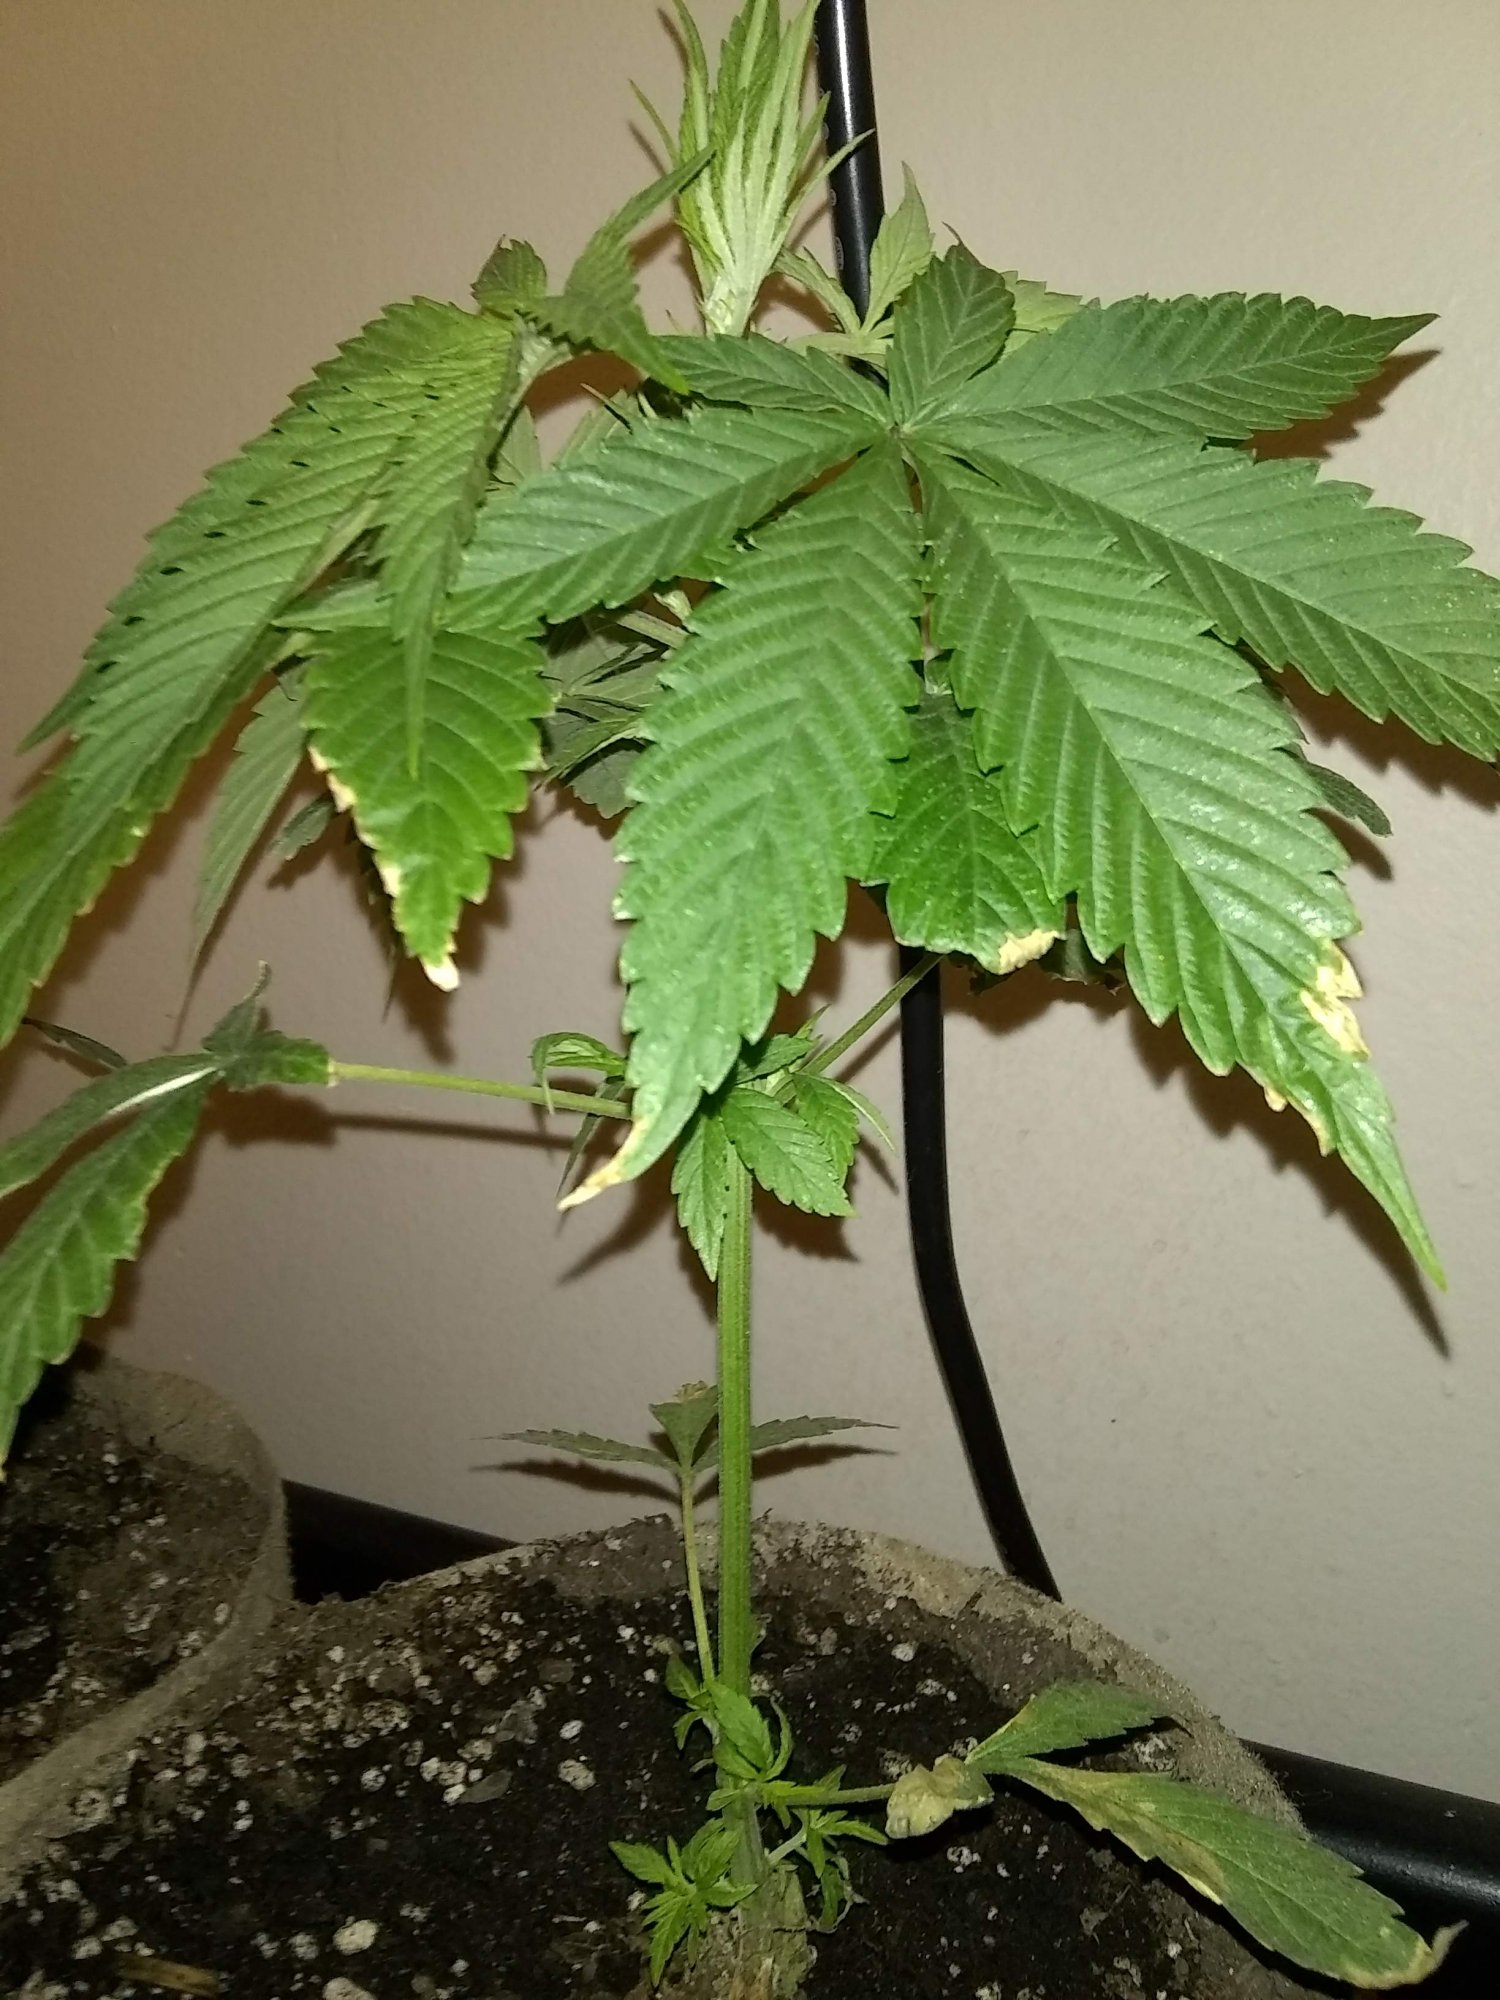 New flowering cycle  hows my inter nodal spacing